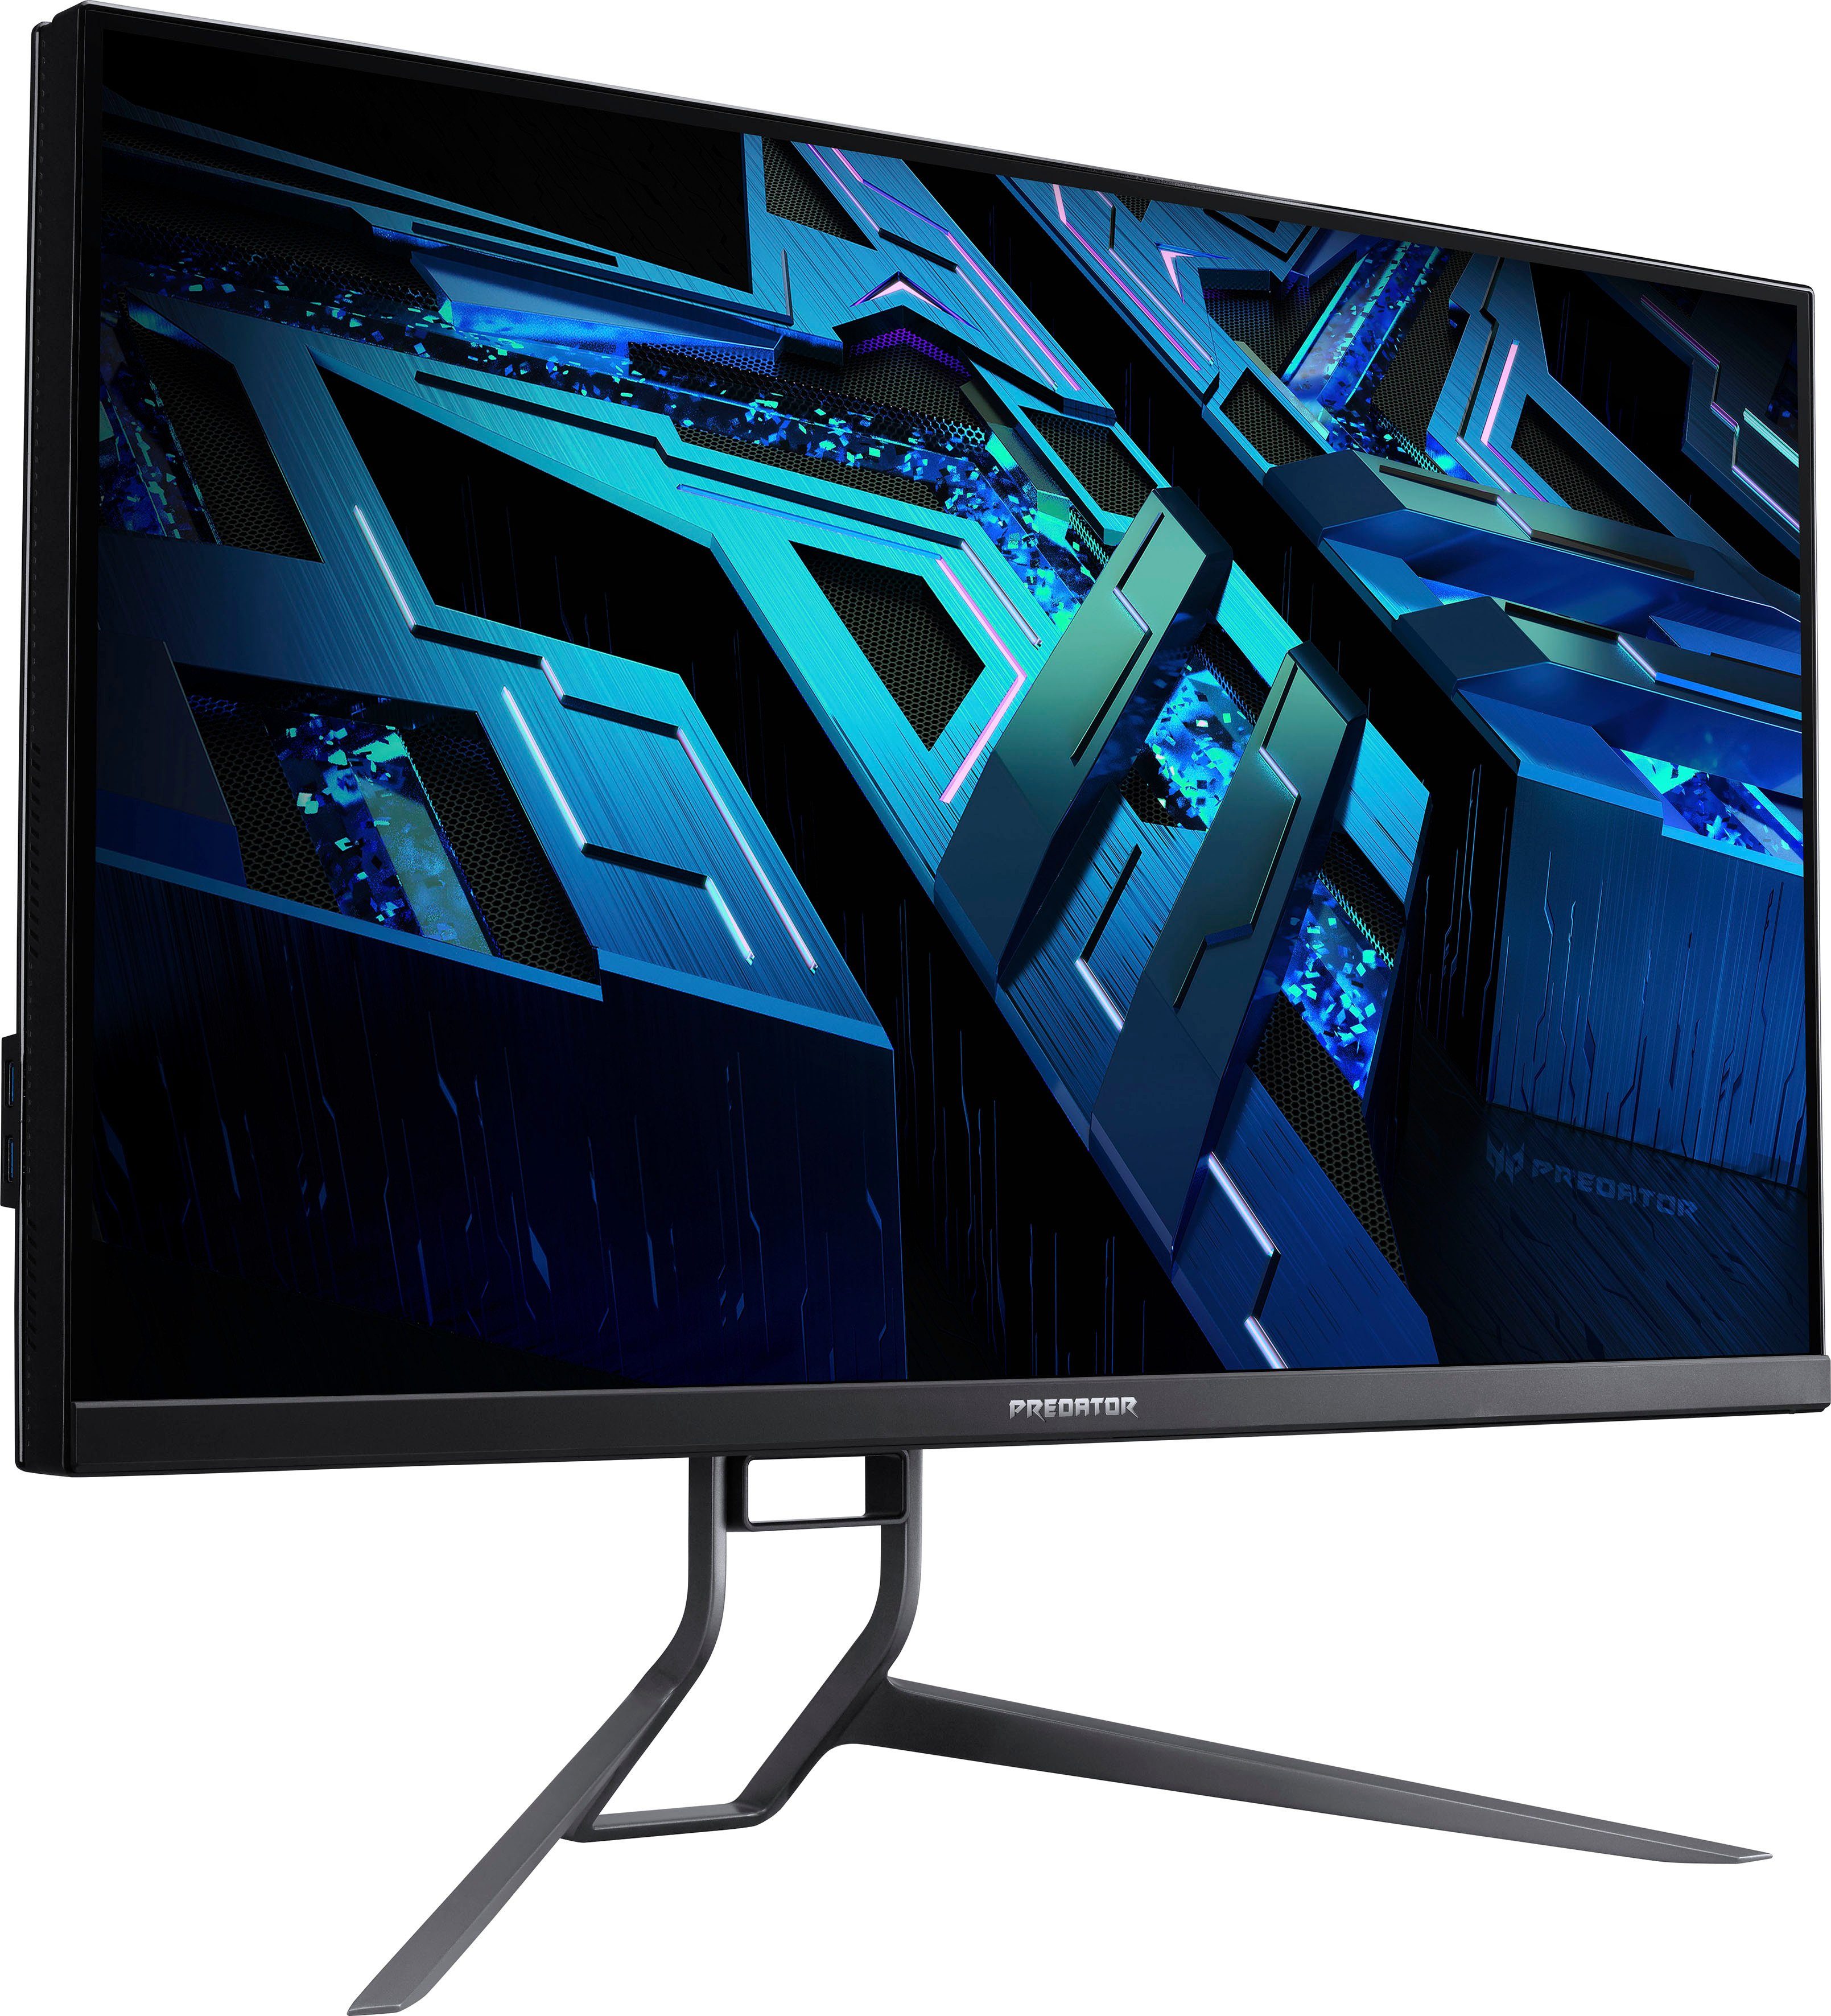 Acer Predator X32 FP Reaktionszeit, Gaming-LED-Monitor Quantum 4K Dot HD, cm/32 0,7 HDR LCD, ms miniLED 3840 Hz, Panel, 1000) Ultra px, 160 2160 (81 x "